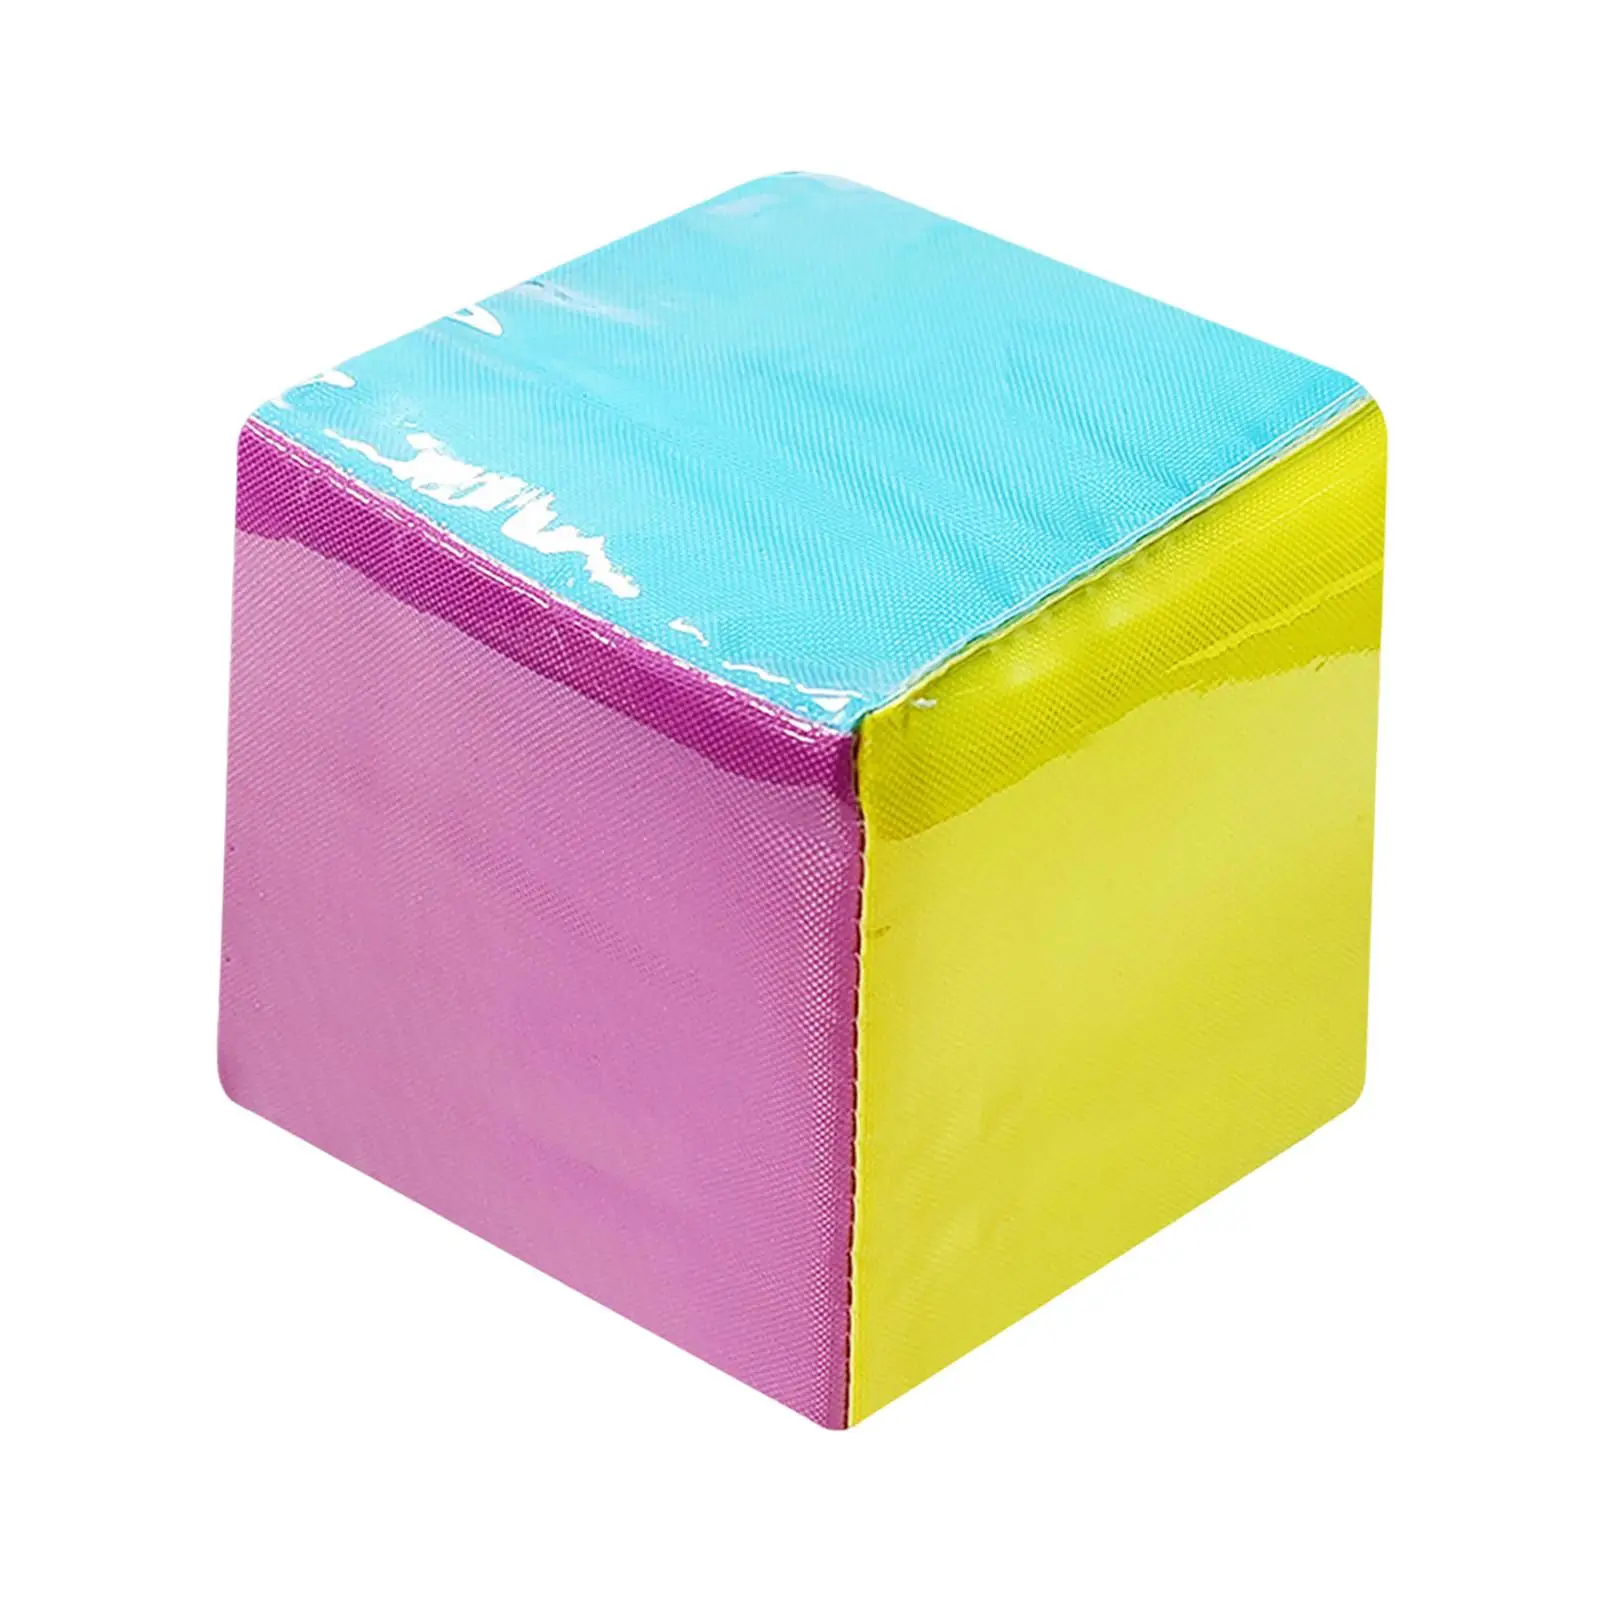 Large Dice Plush Cube Early Education Learning Cubes for Teaching Classroom